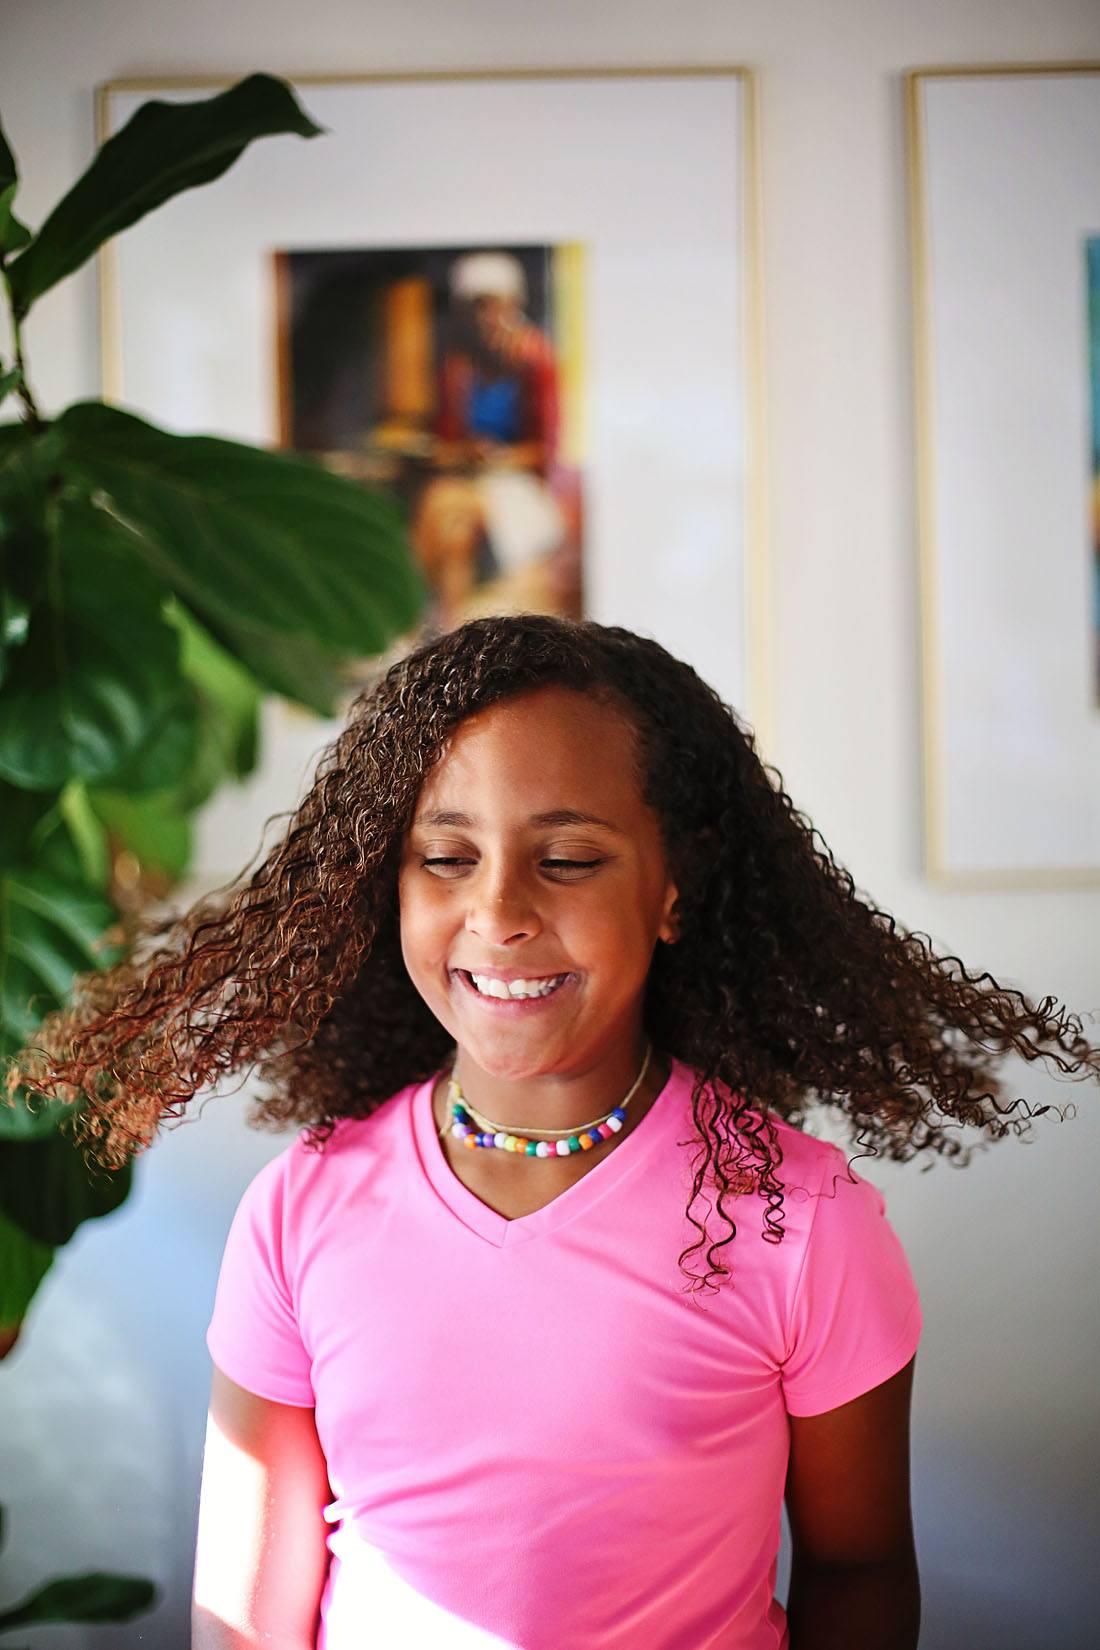 curly hair on multiracial kid with low porosity hair